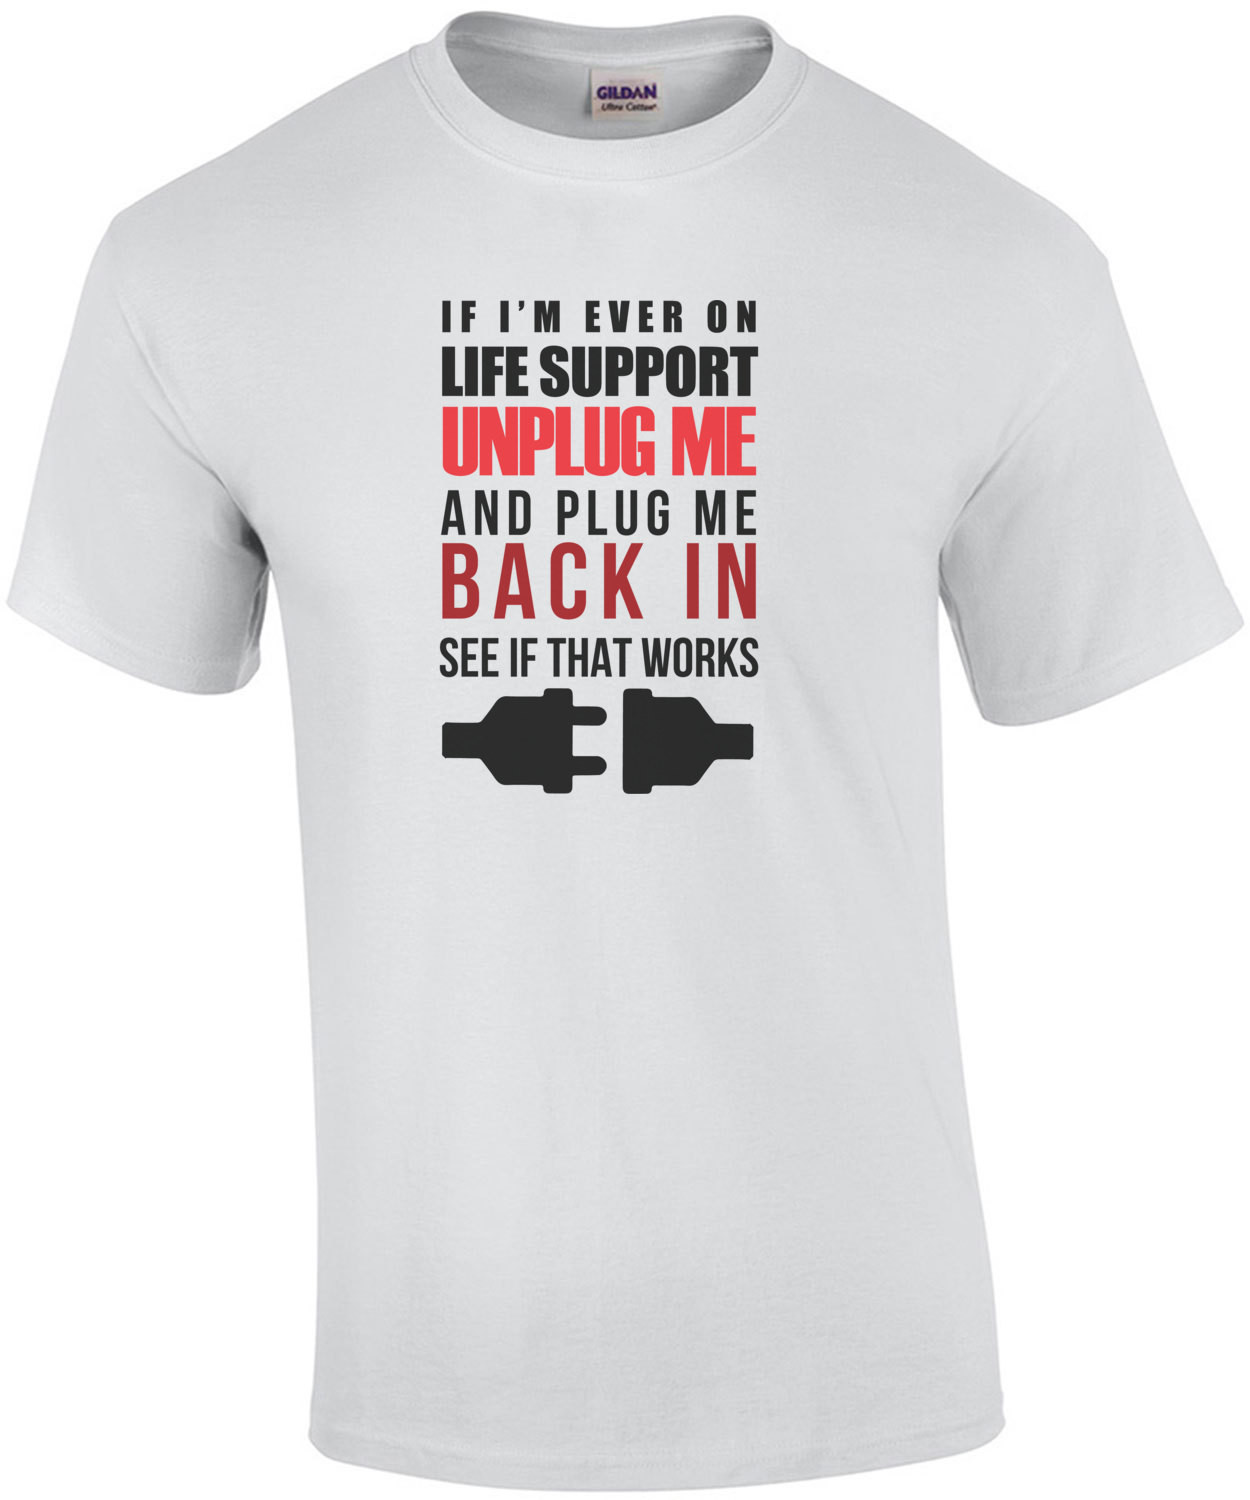 If I'm ever on life support unplug me and plug me me back in see if that works - funny t-shirt